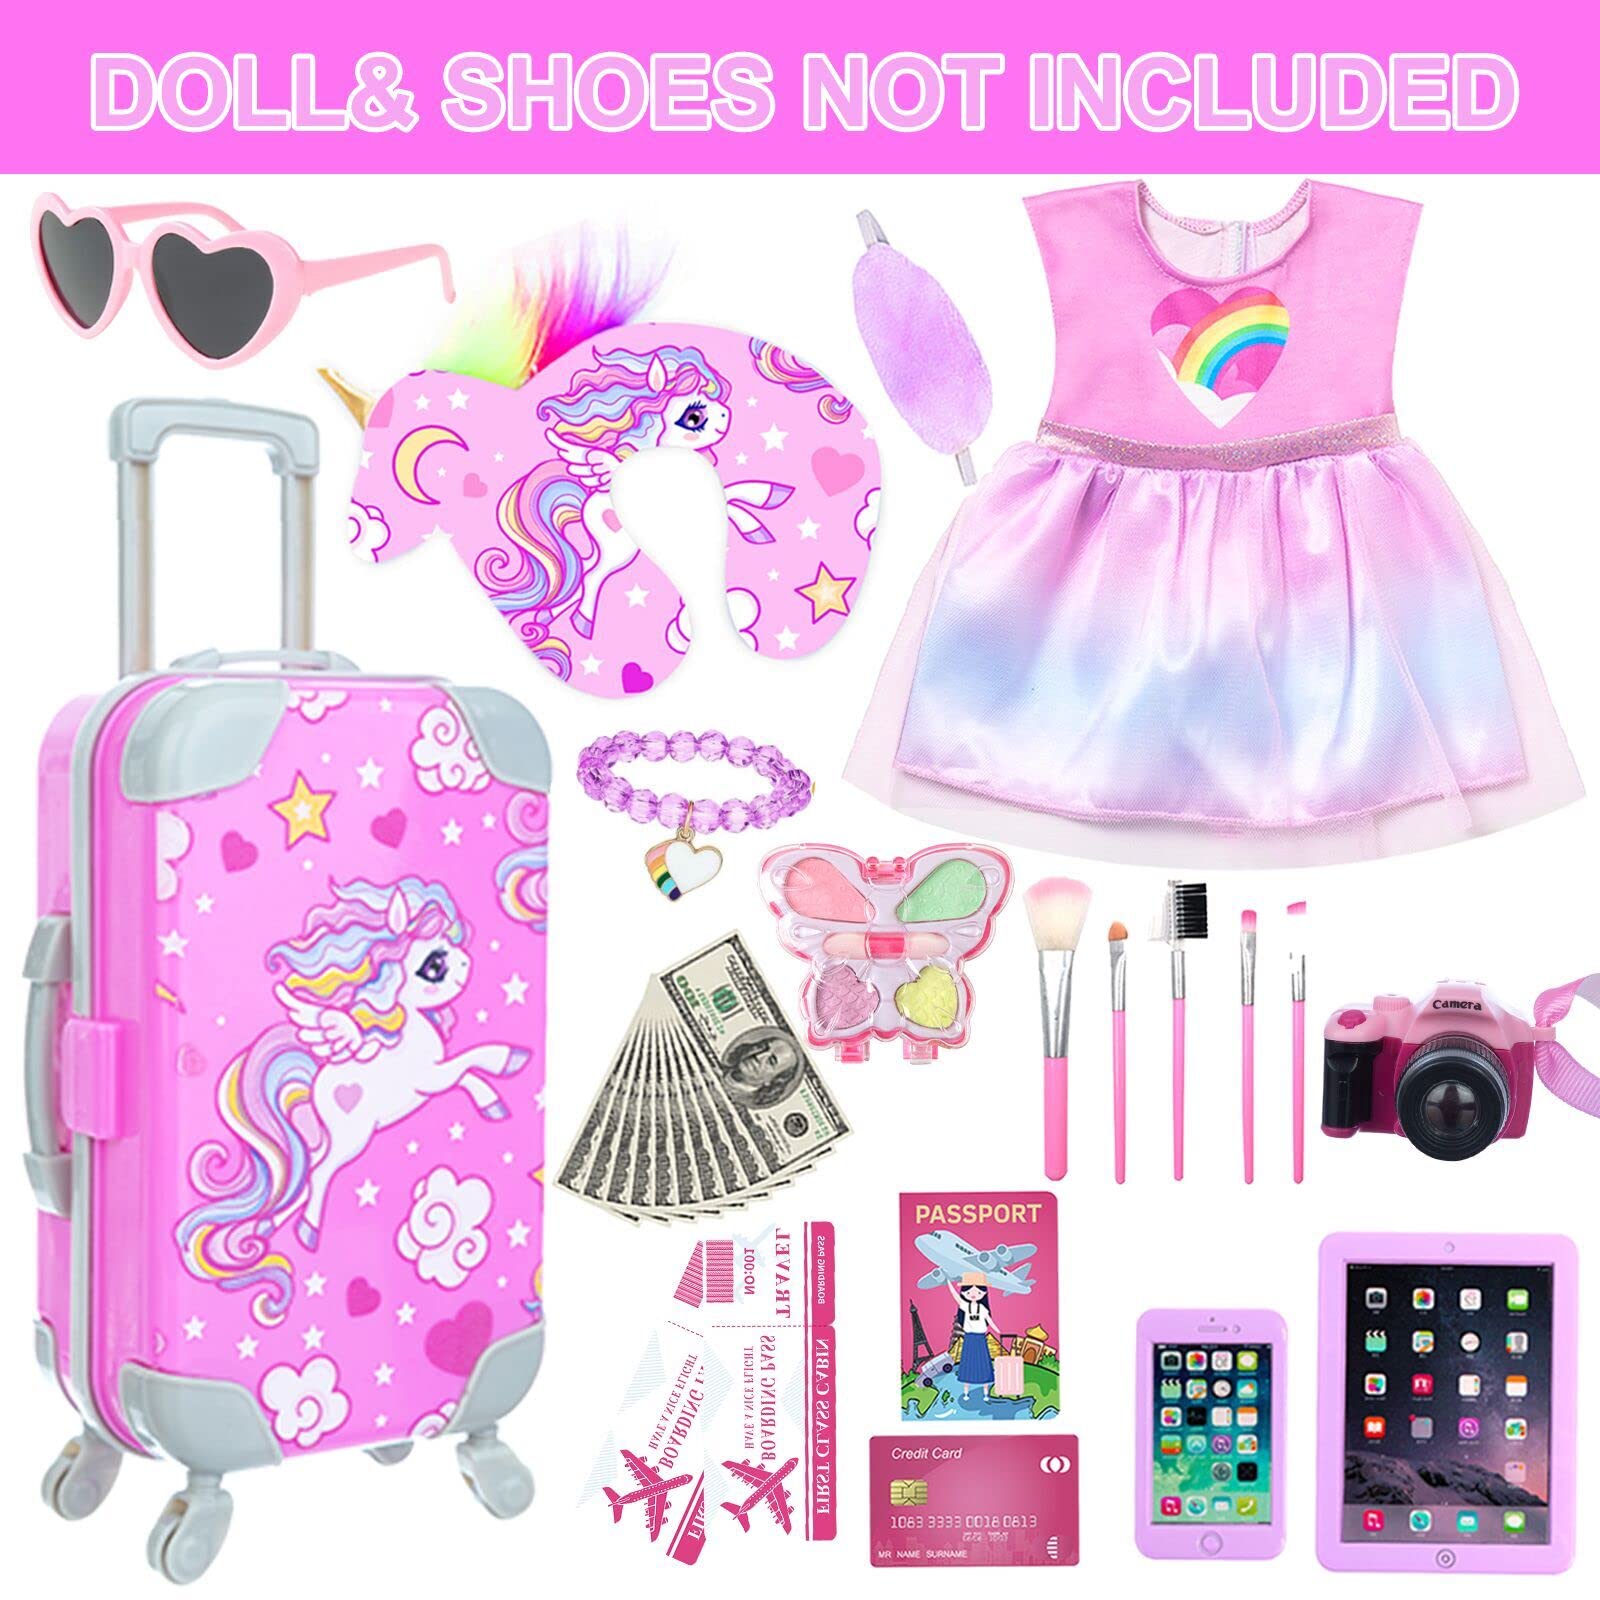 DOTVOSY 29 Pcs American 18 Inch Doll Clothes and Accessories Travel Suitcase Set Designed for 18" Dolls Including Pillow, Sunglasses, Camera, Passport, Phone, Laptop etc